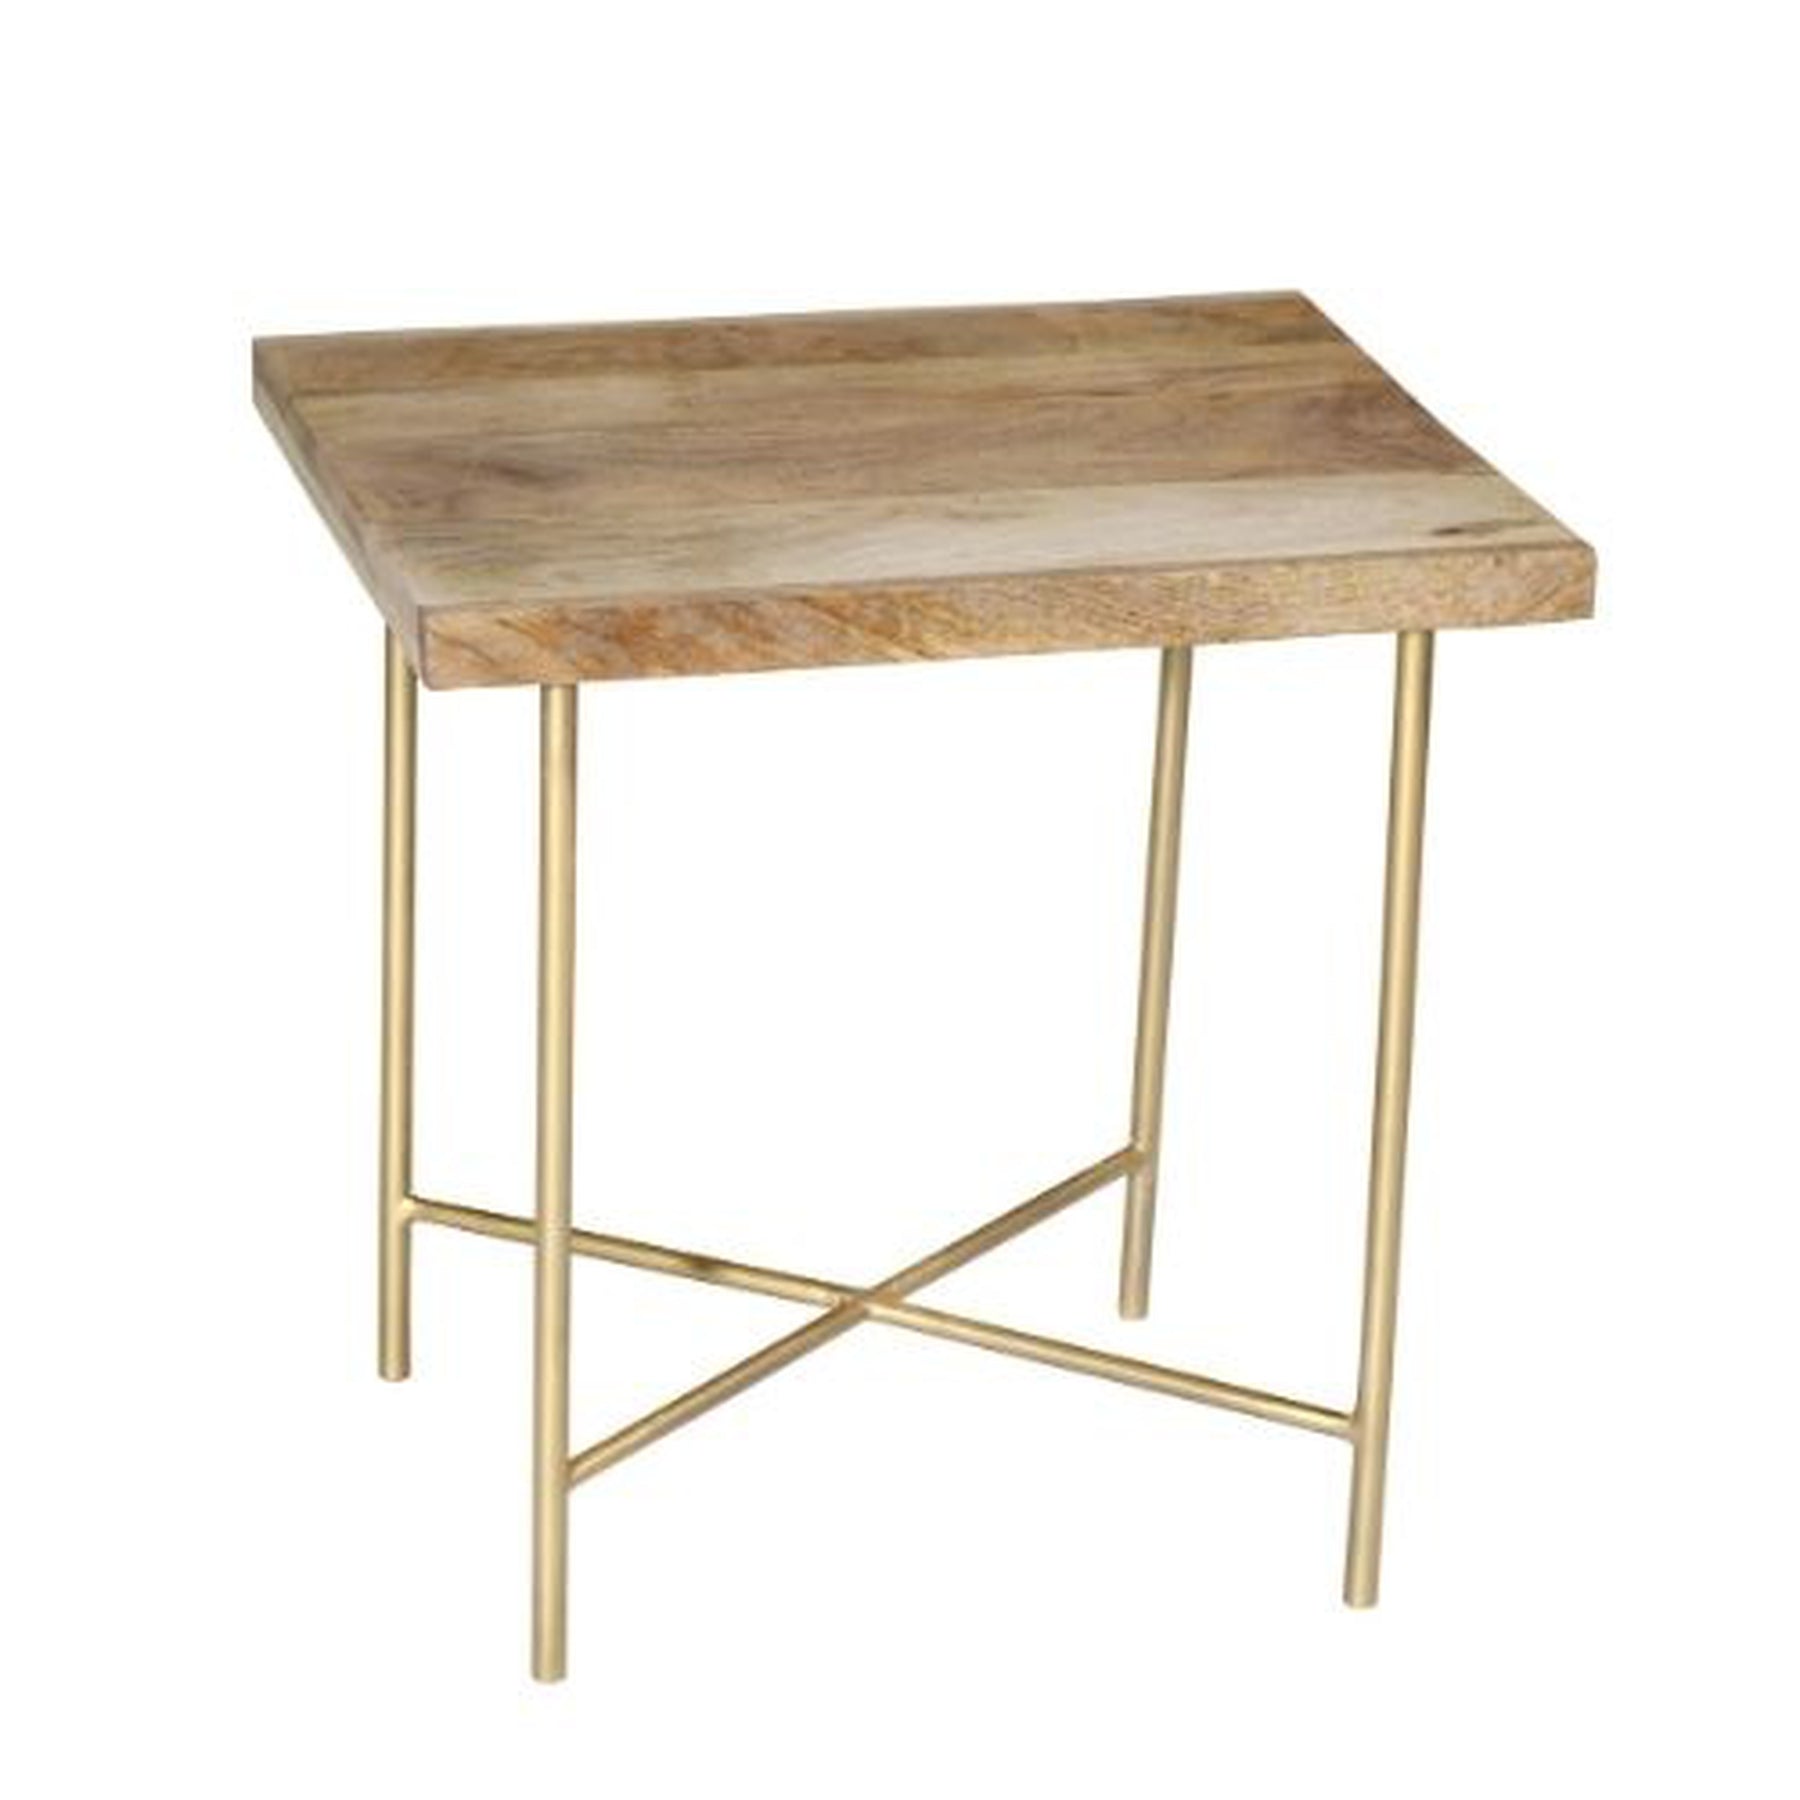 Wooden Ring Range Side Table - Wooden Living Room Side Table | 20x16x20 inches